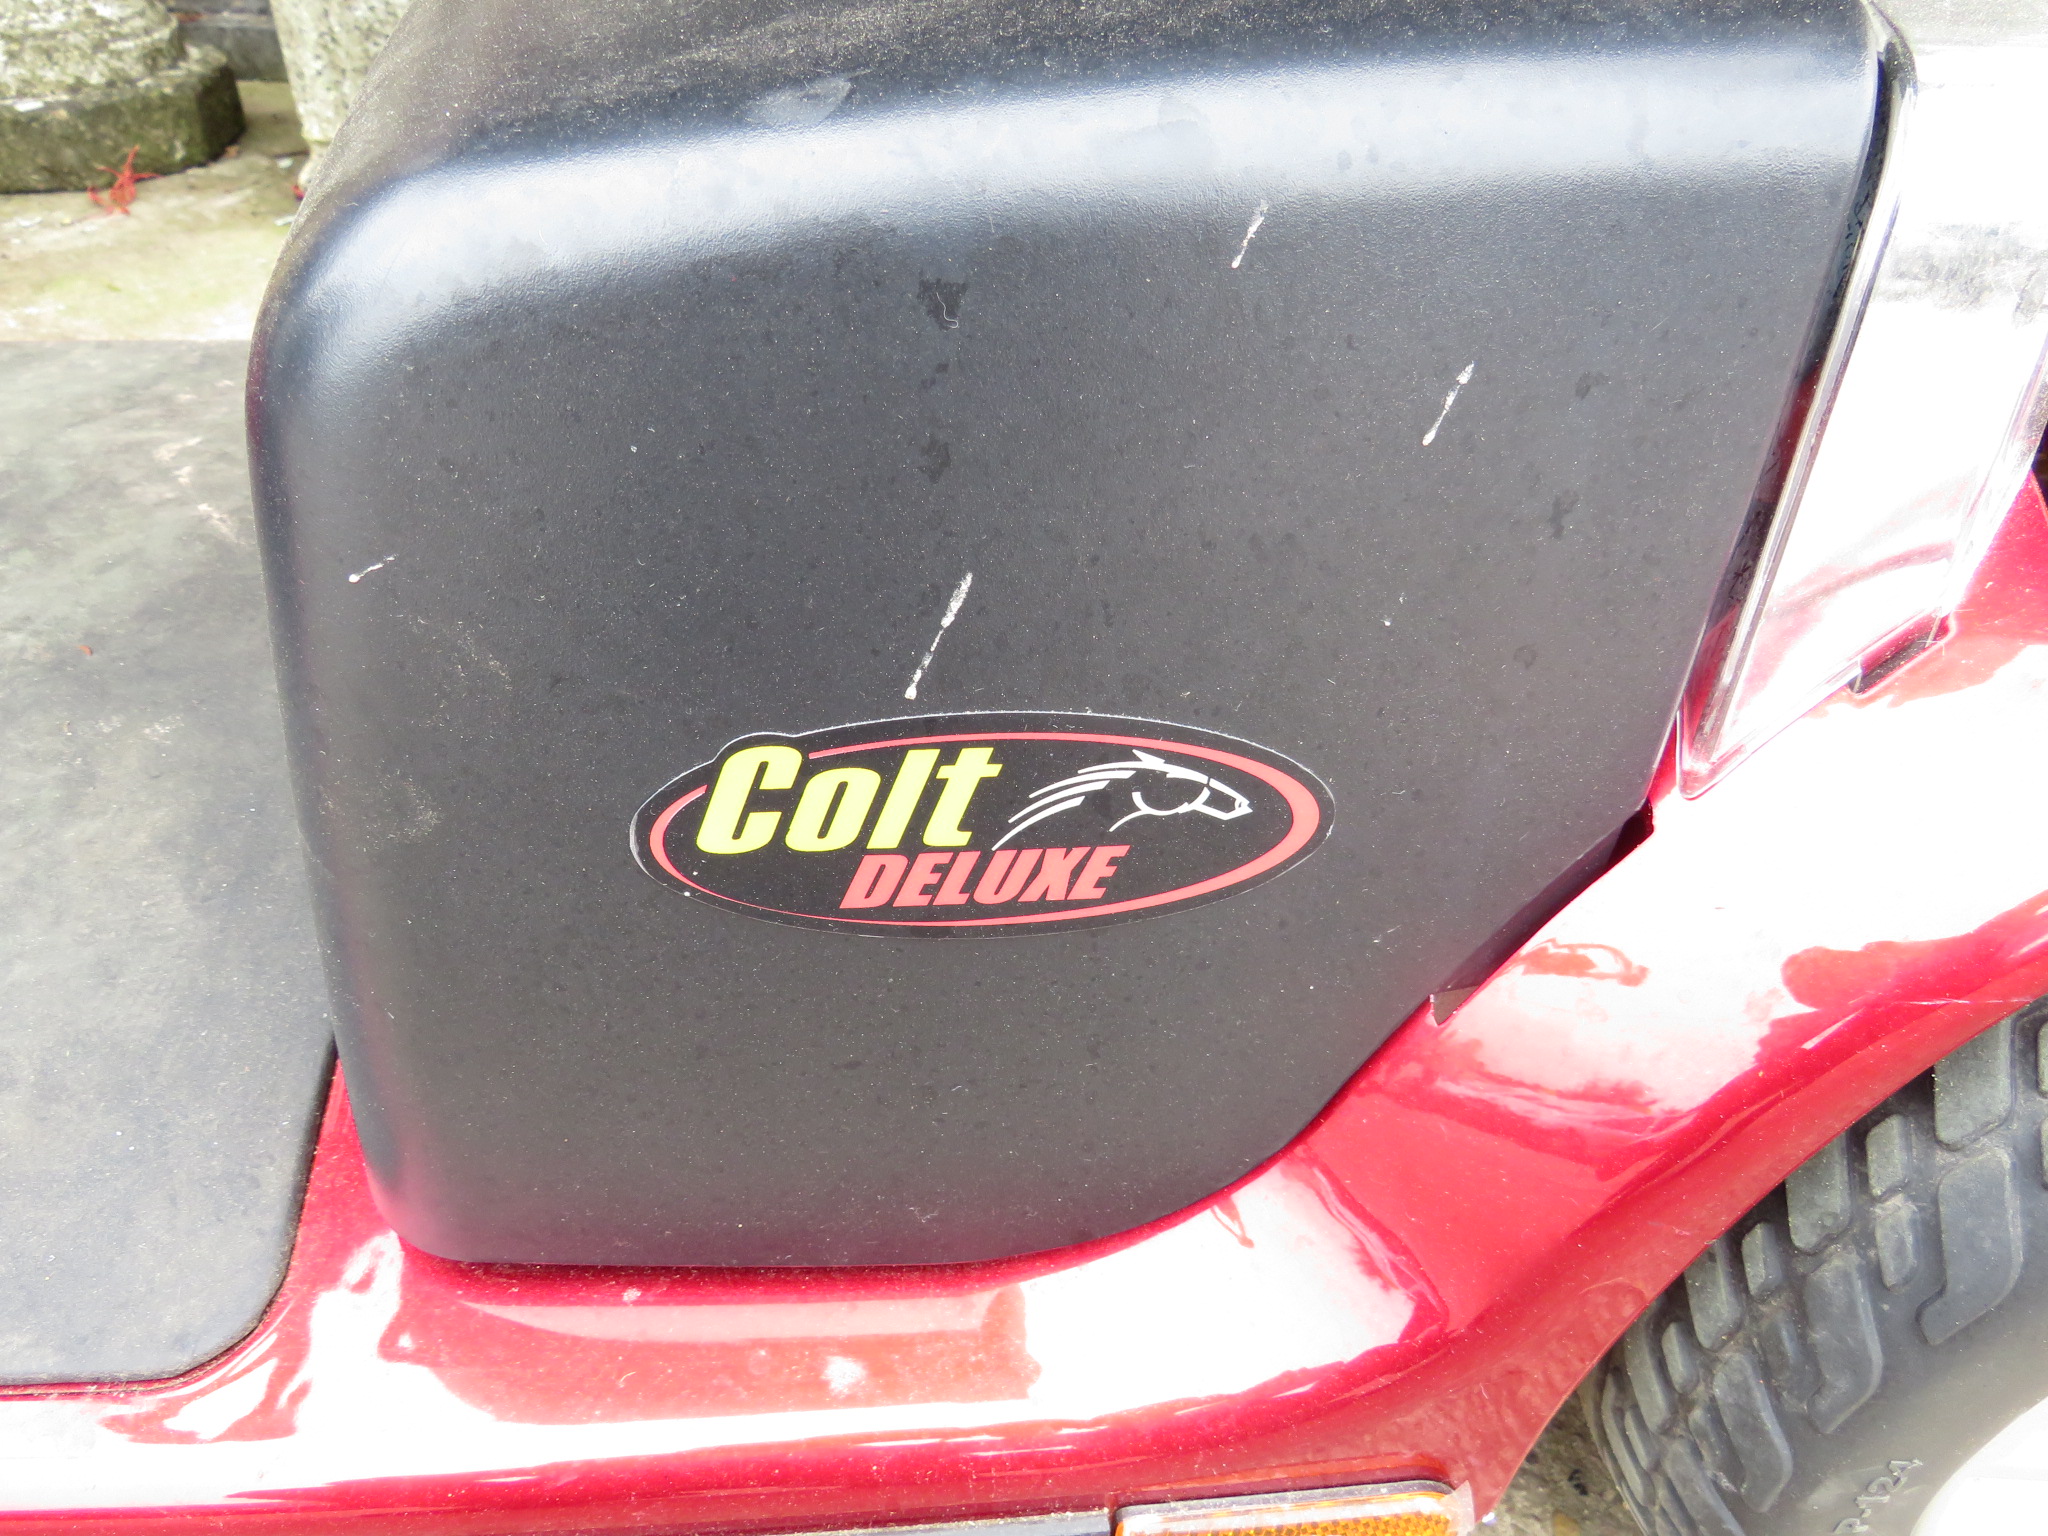 PRIDE COLT DELUXE MOBILITY SCOOTER (KEY AND CHARGER IN OFFICE) - Image 3 of 3